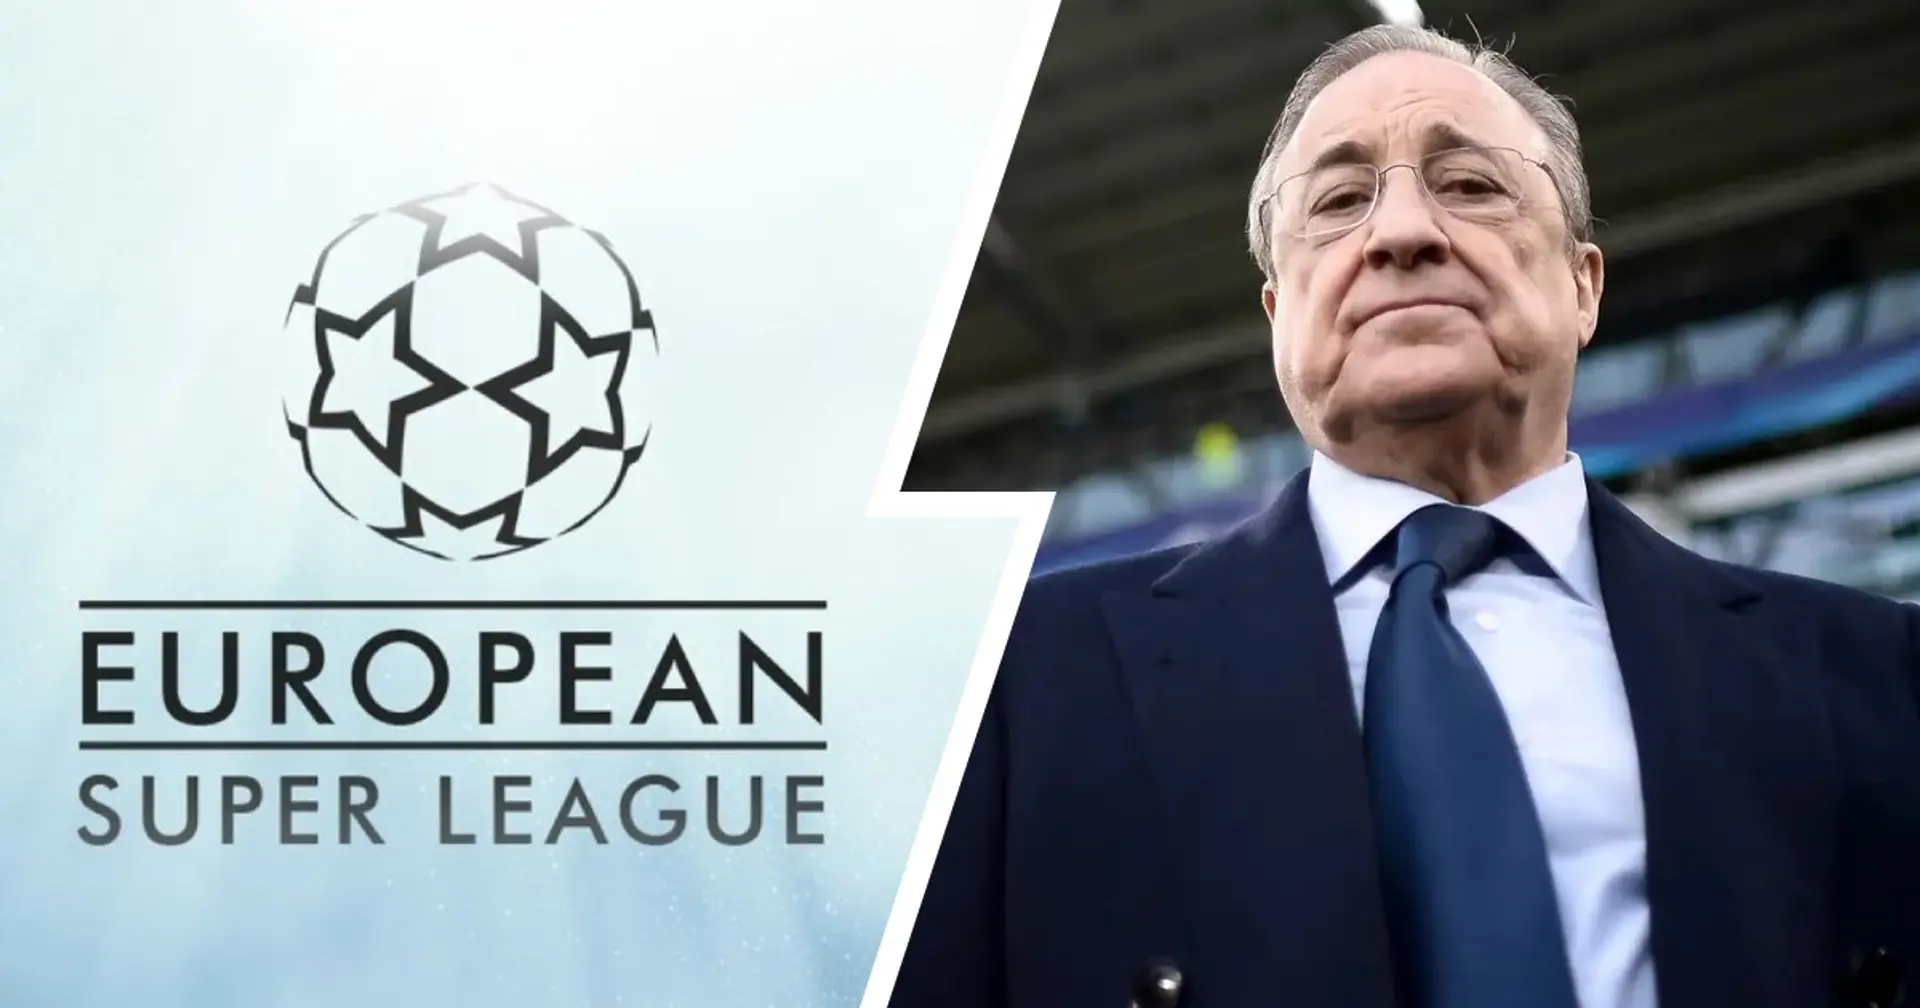 New European Super League announced, aimed to replace Champions League - explained